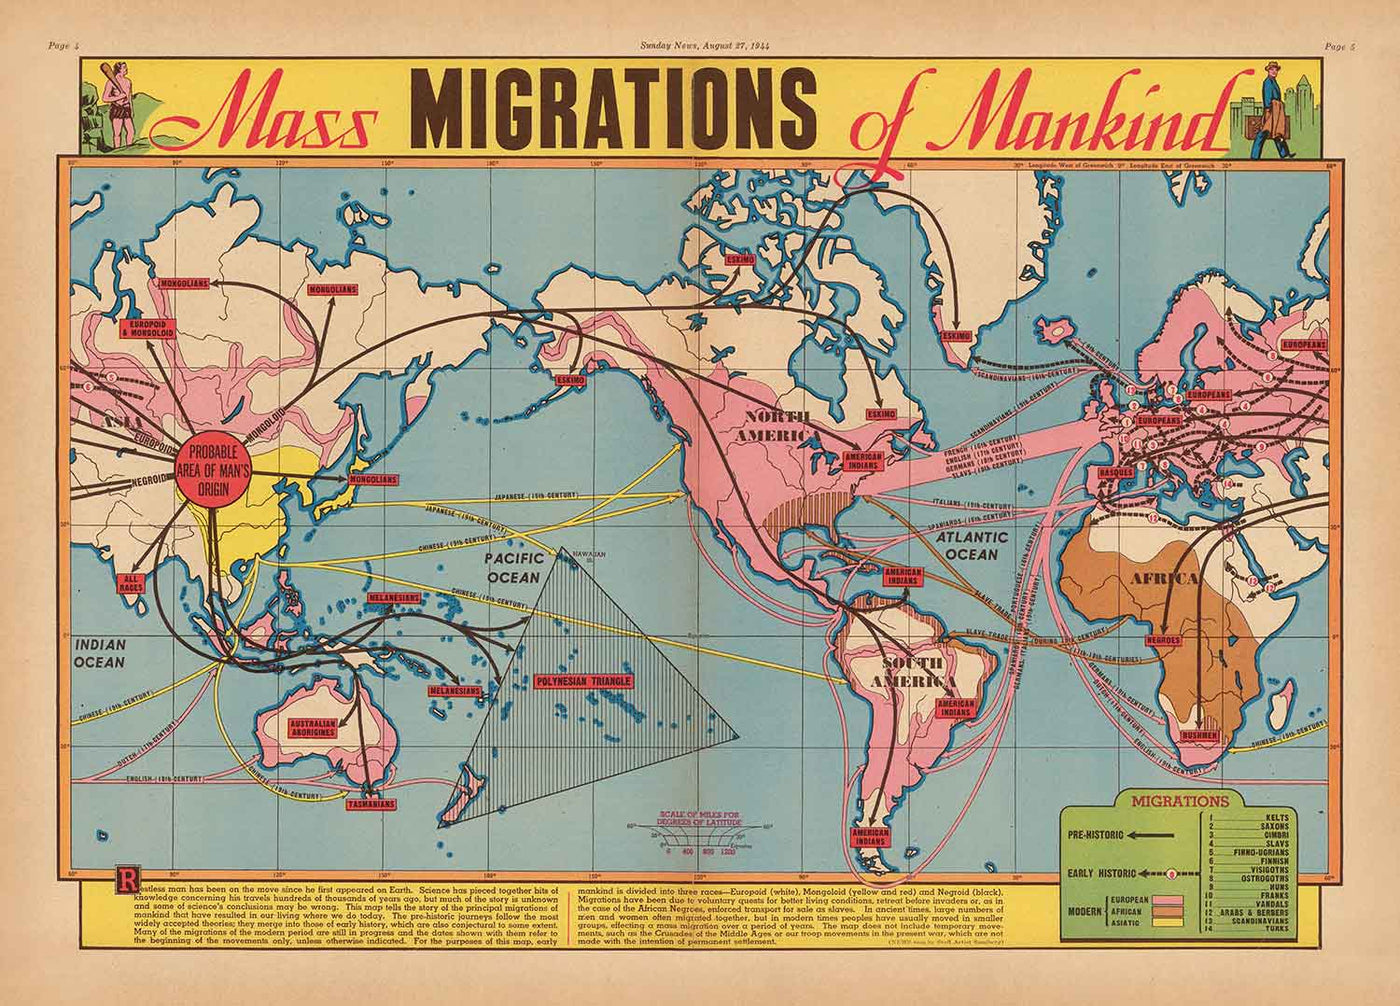 Old Map of Mass Migrations of Mankind, 1944 by Edwin Sundberg - Out of Asia Origin Theory, Slave Trade, Prehistoric Civilisation